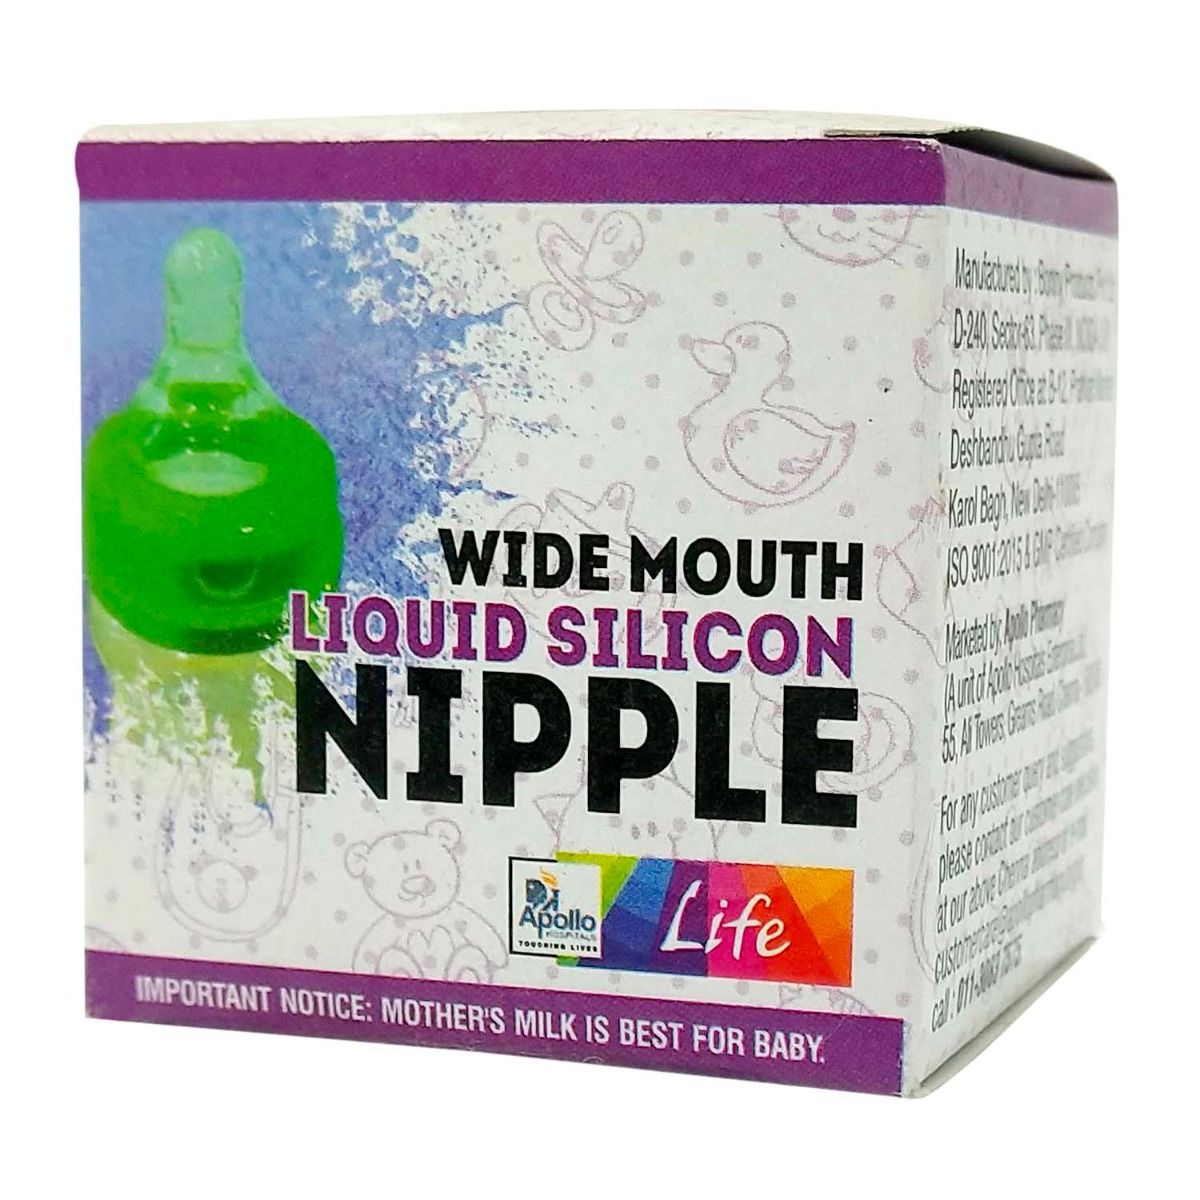 Apollo Life Wide Mouth Liquid Silicone Nipple, 1 Count, Pack of 1 